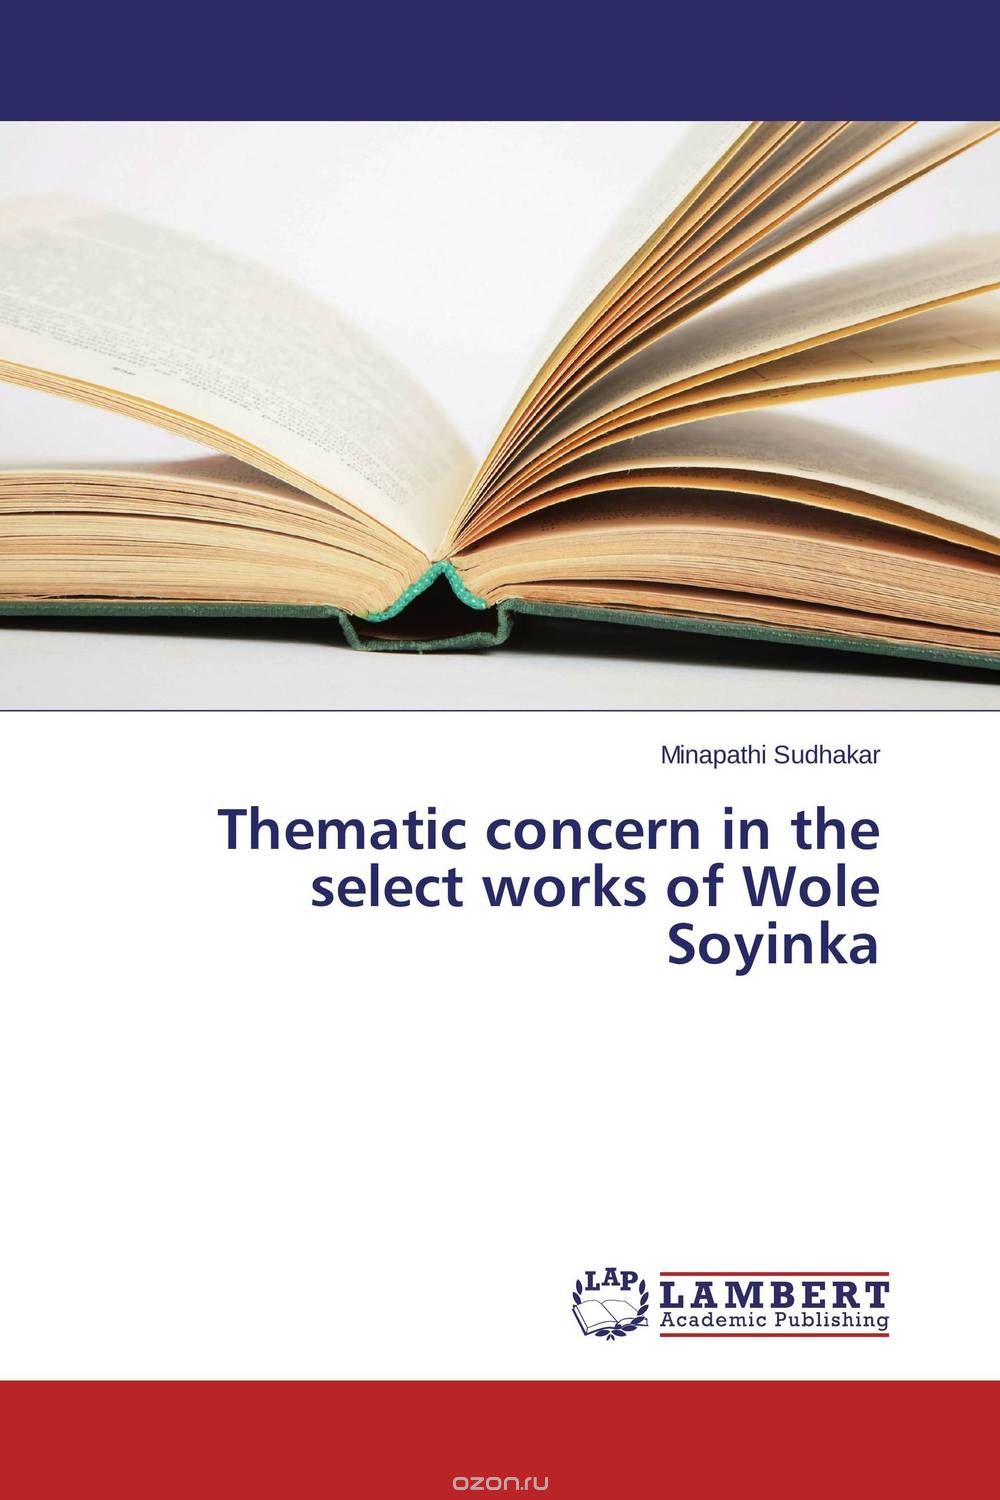 Скачать книгу "Thematic concern in the select works of Wole Soyinka"